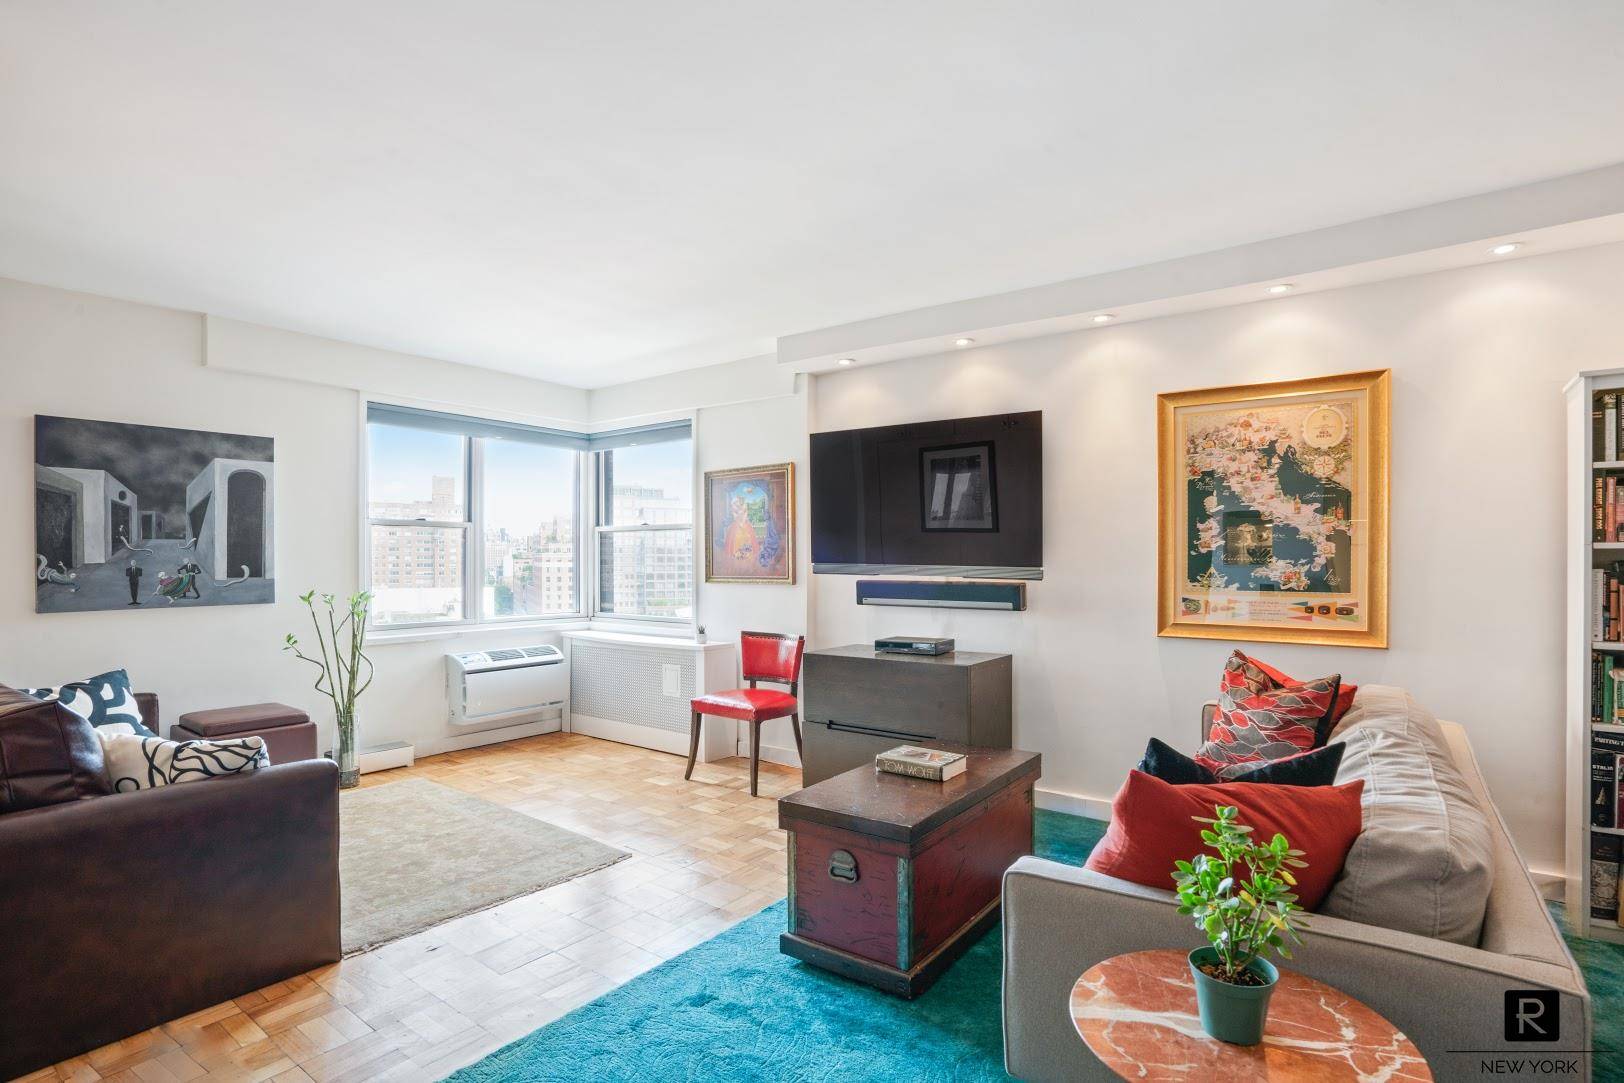 Come home to this spacious and stylishly renovated Coop apartment in an unrivaled and superbly convenient location in the West Village.